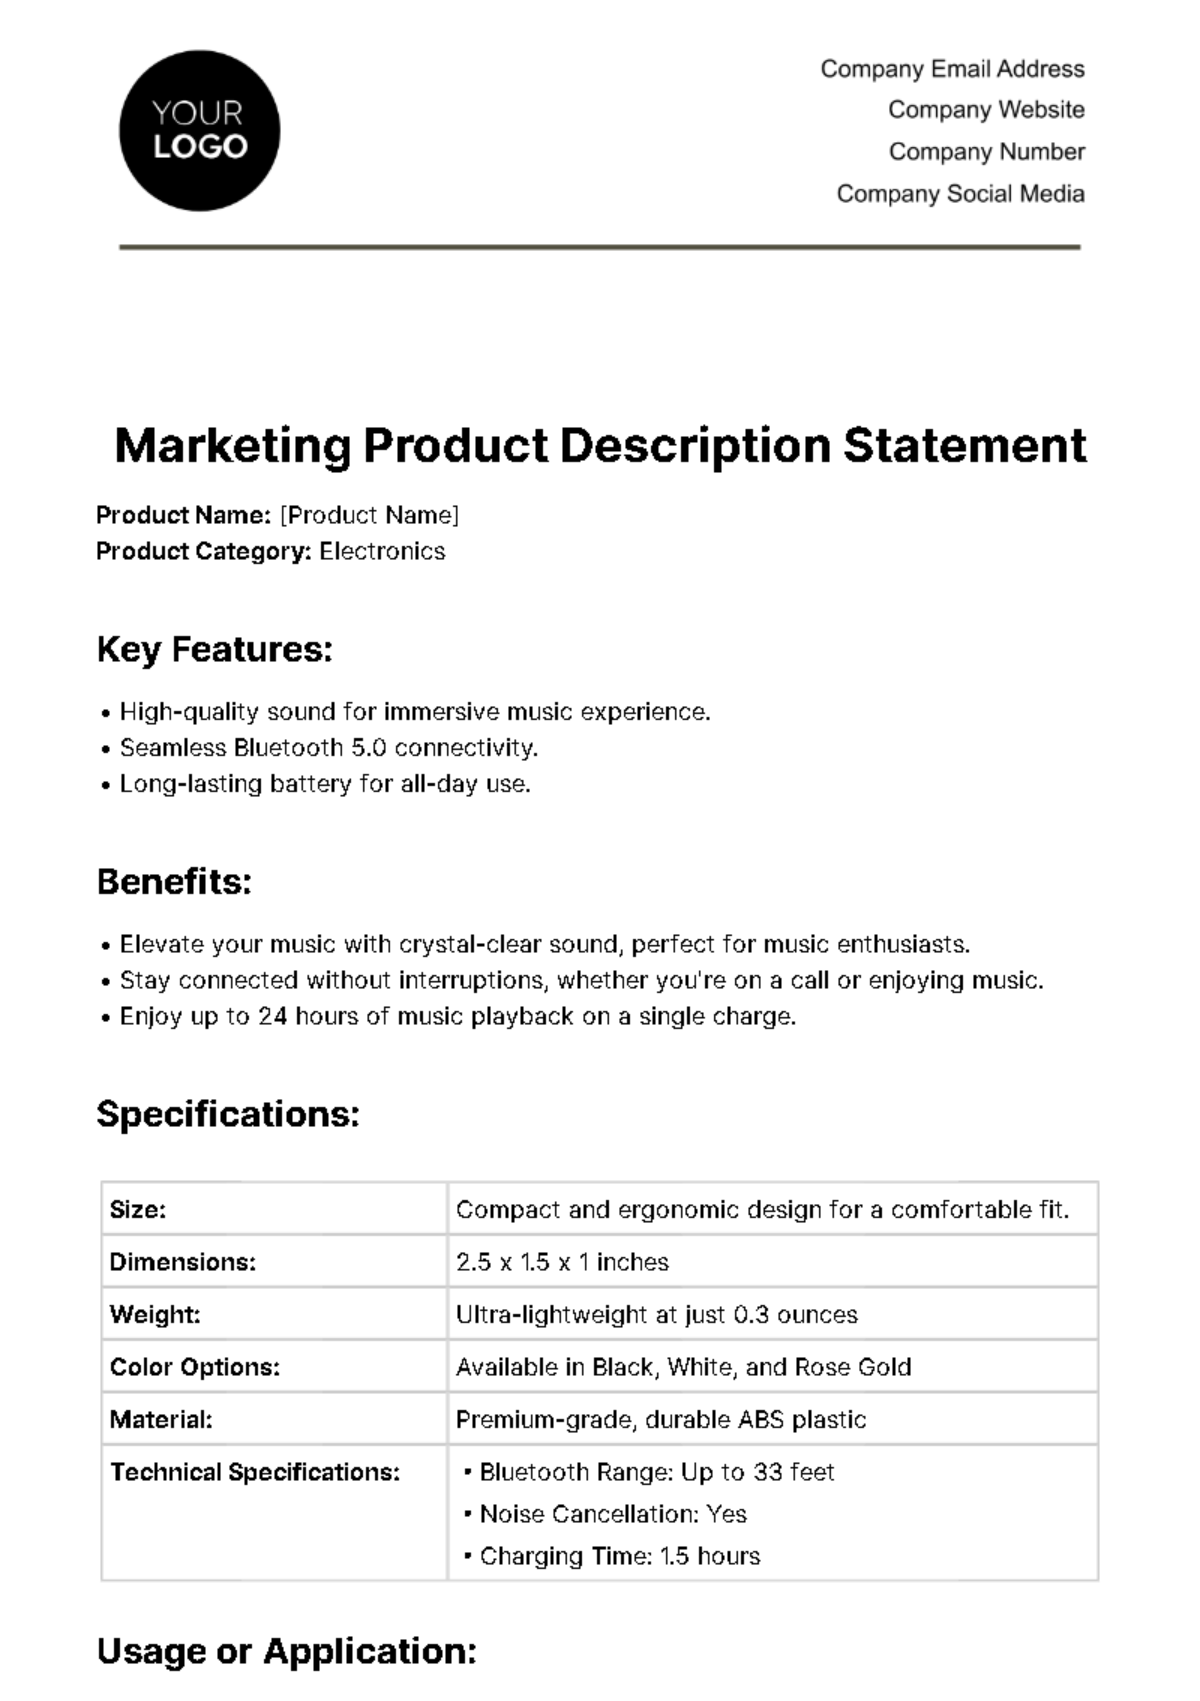 Free Marnketing Product Description Statement Template